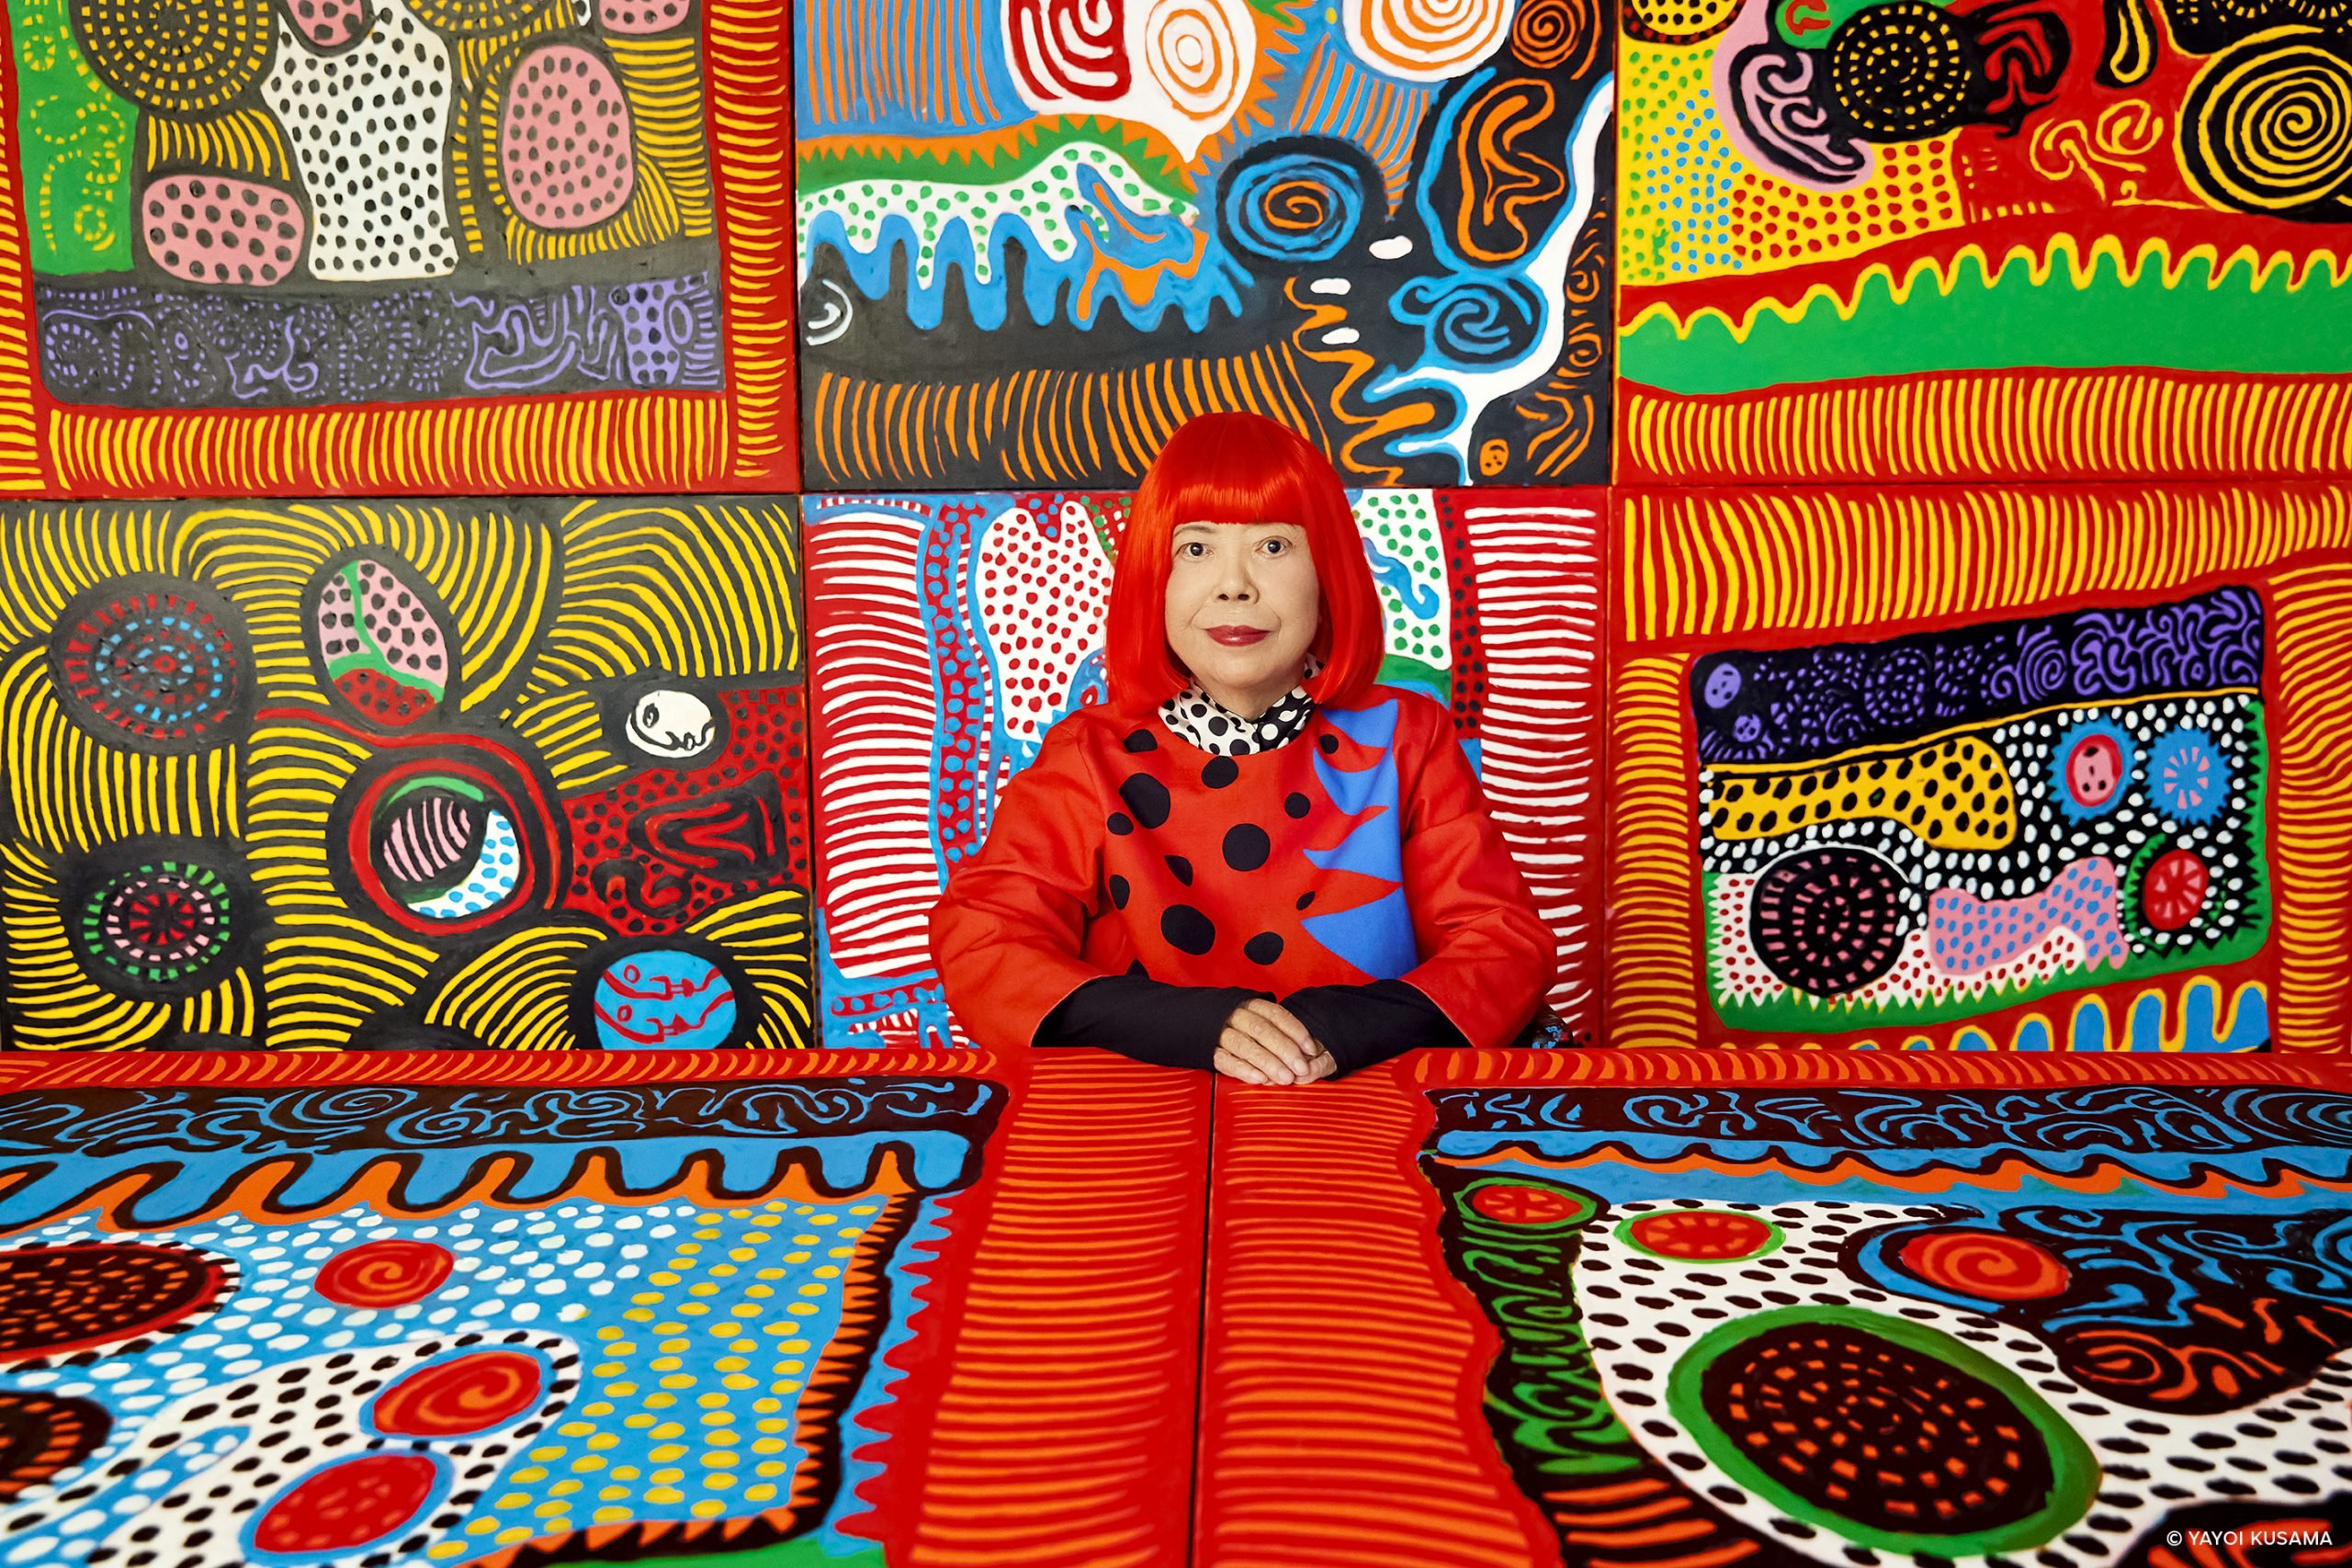 In Pictures: See Yayoi Kusama's Infinity Nets and Polka Dots at 